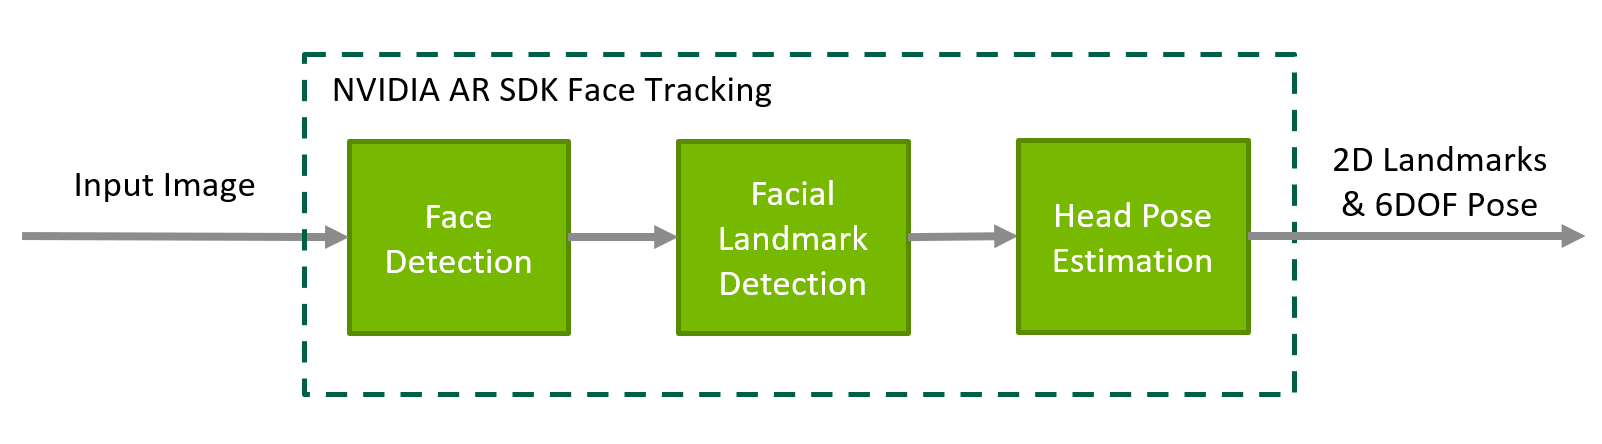 Face tracking input and output workflow where input image converts into 2D landmarks and 6DOF pose.